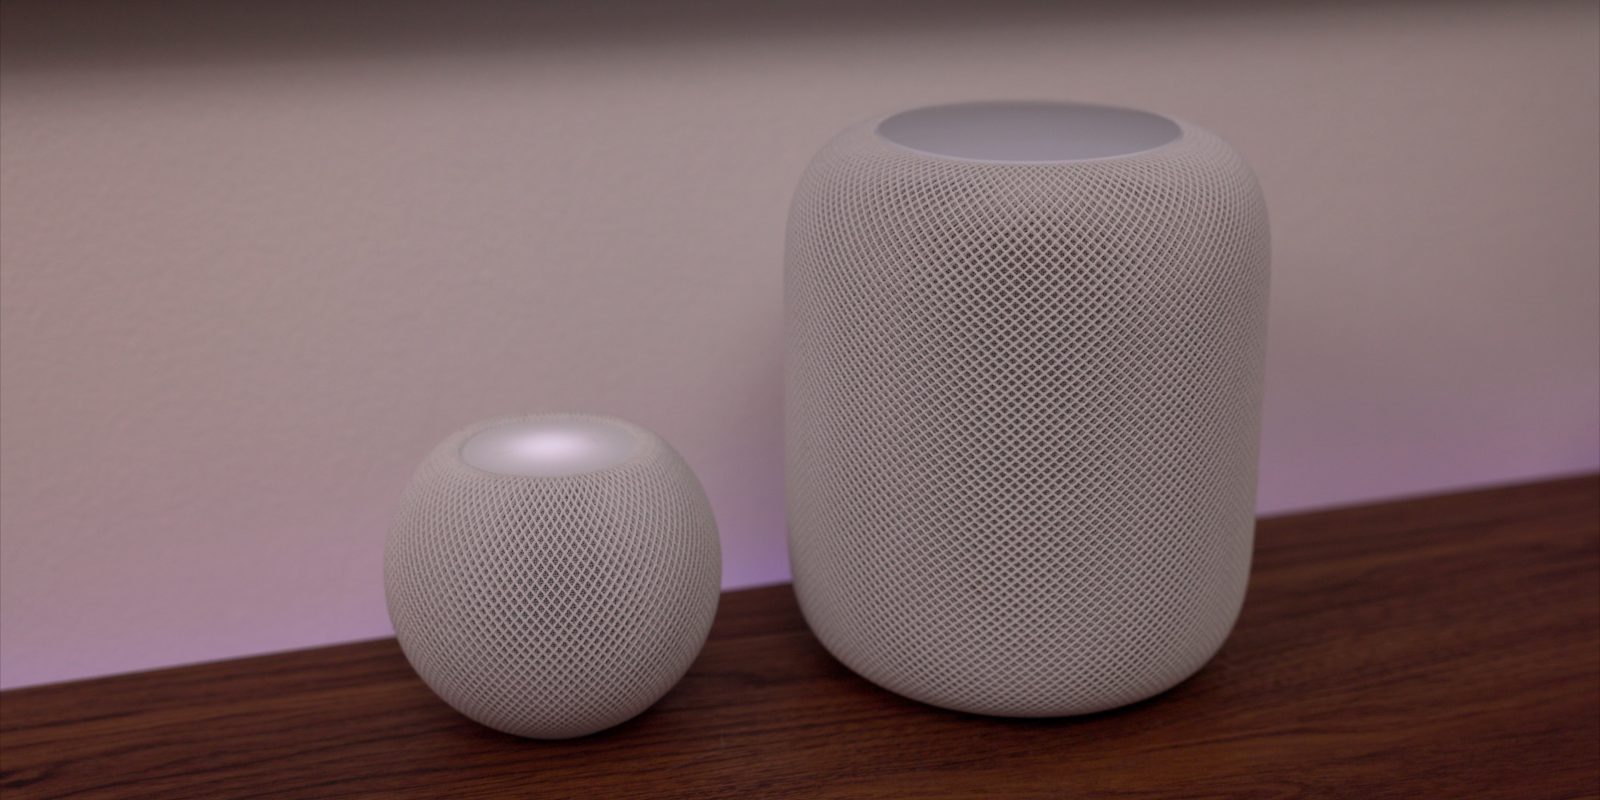 iOS 16.1 hints at new way to group multiple HomePods and AirPlay 2 speakers